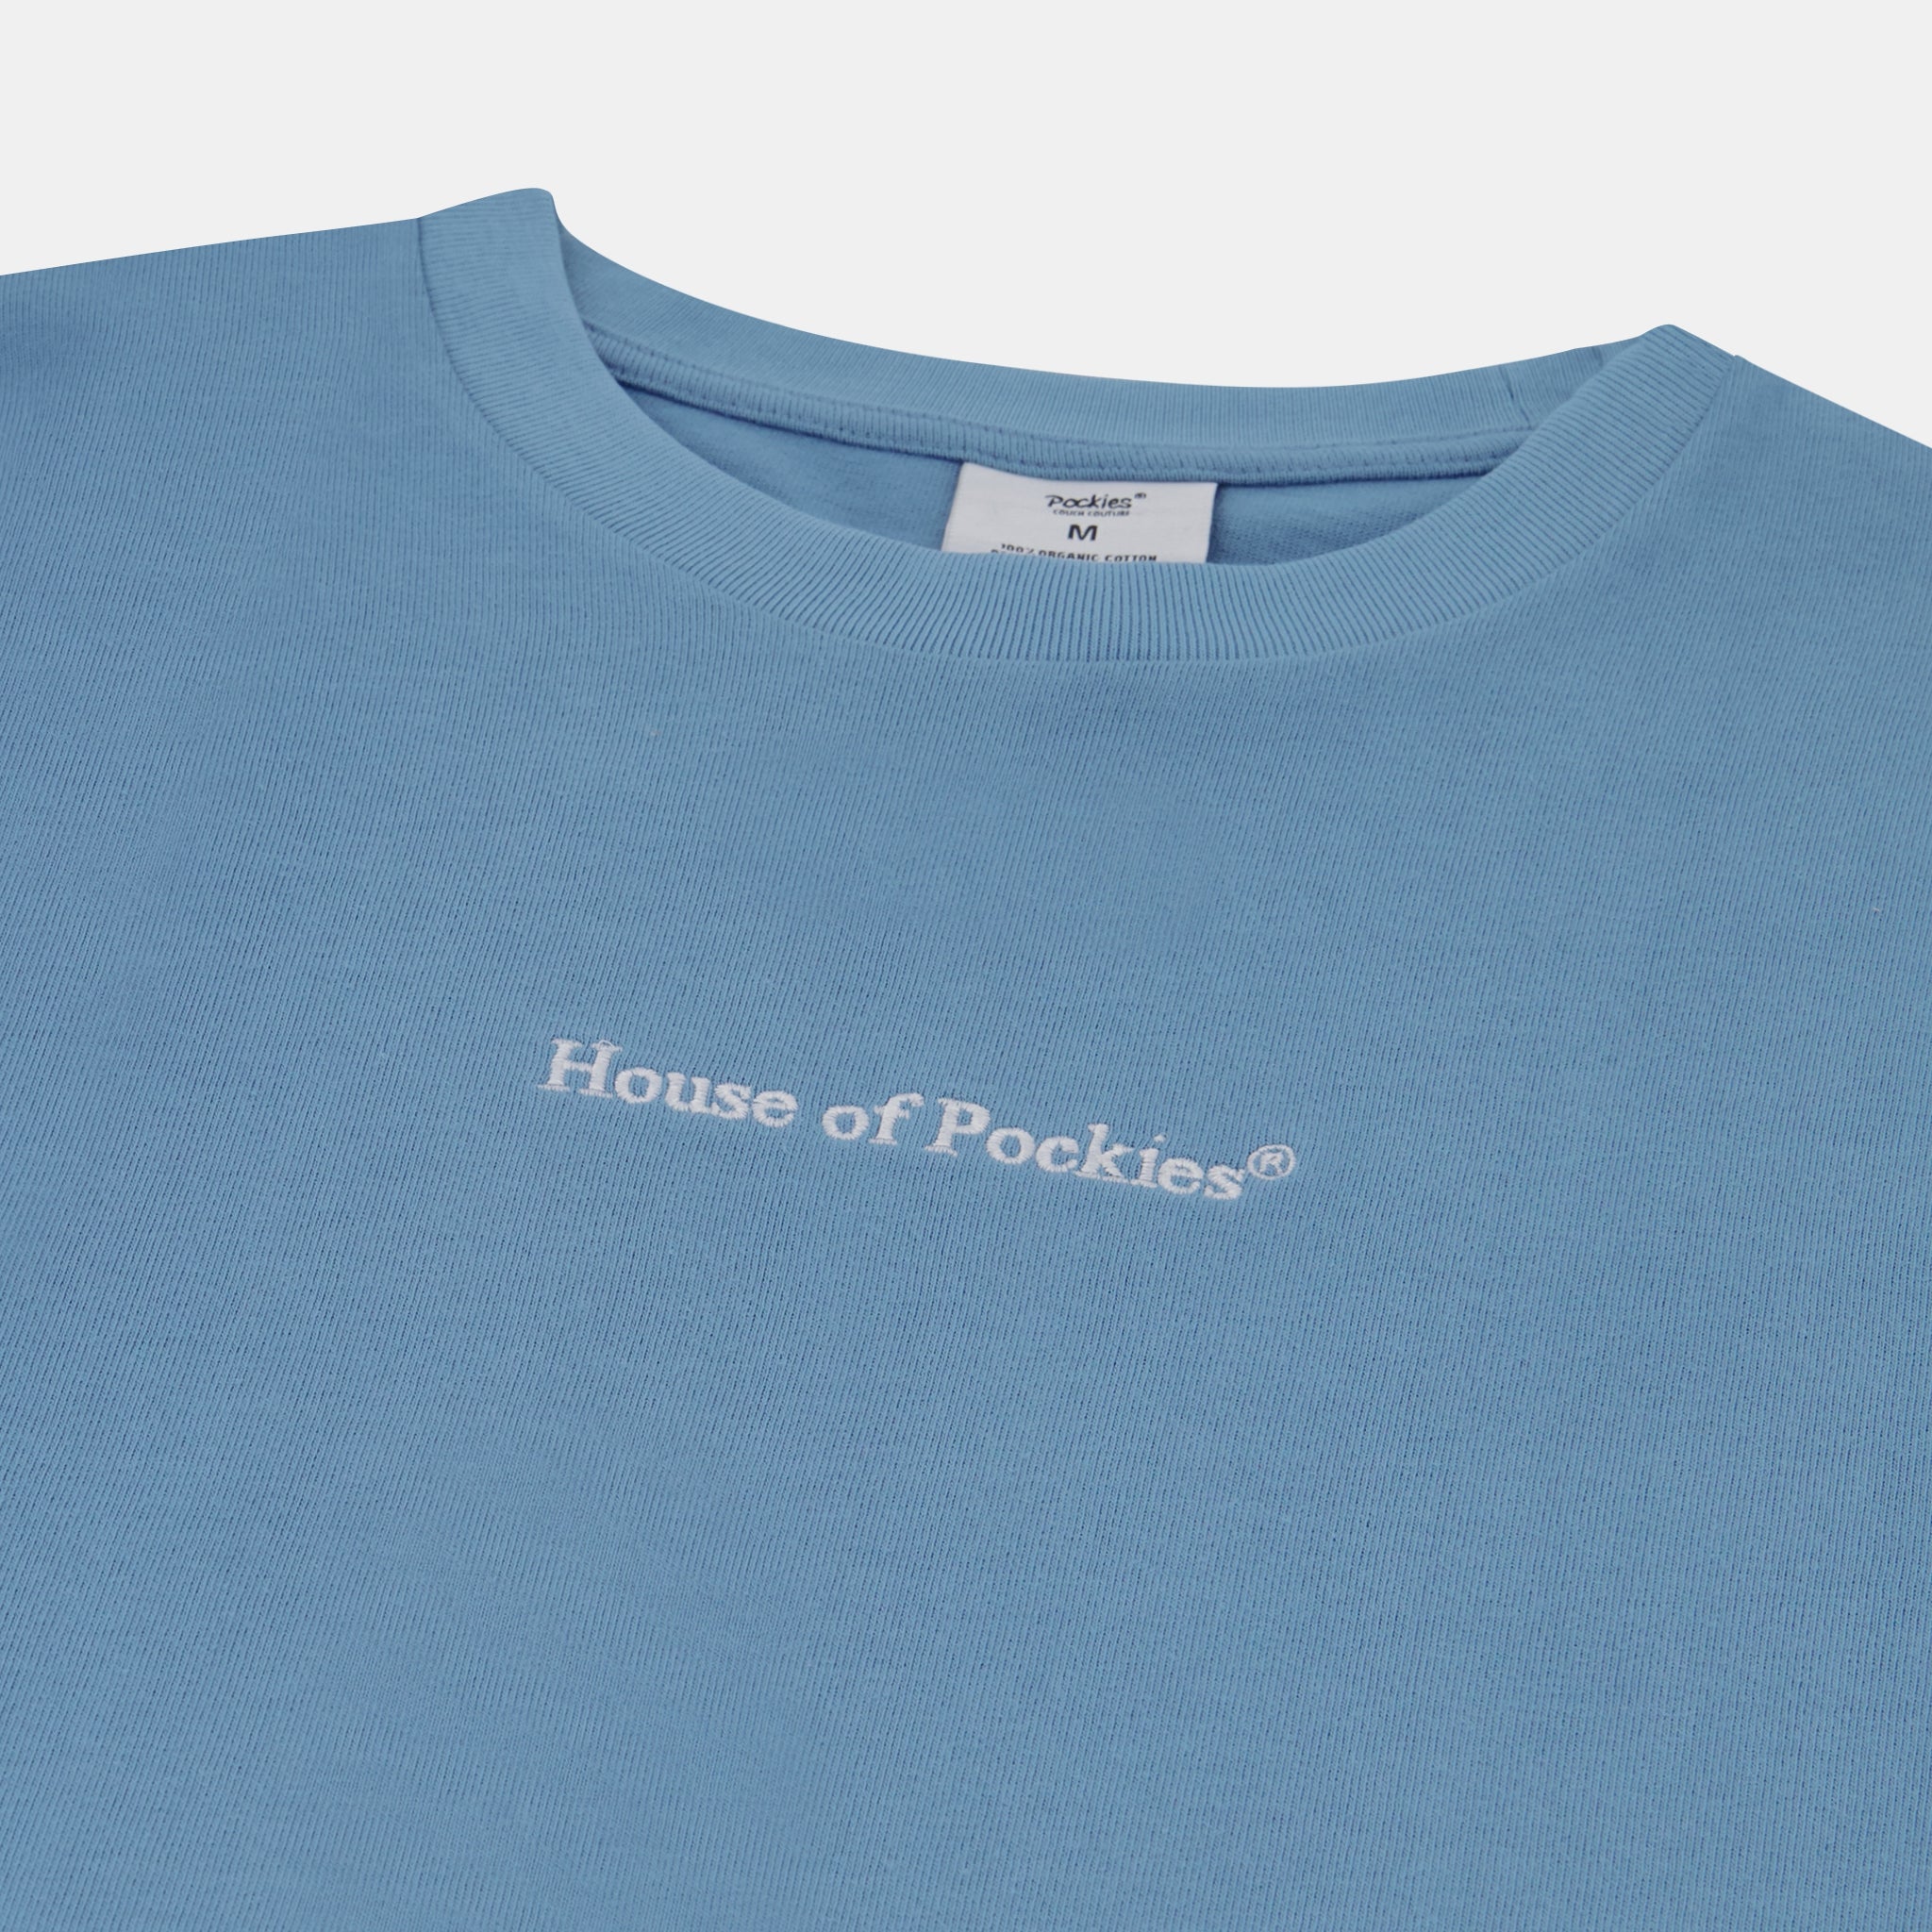 The House of Pockies Tee Blue